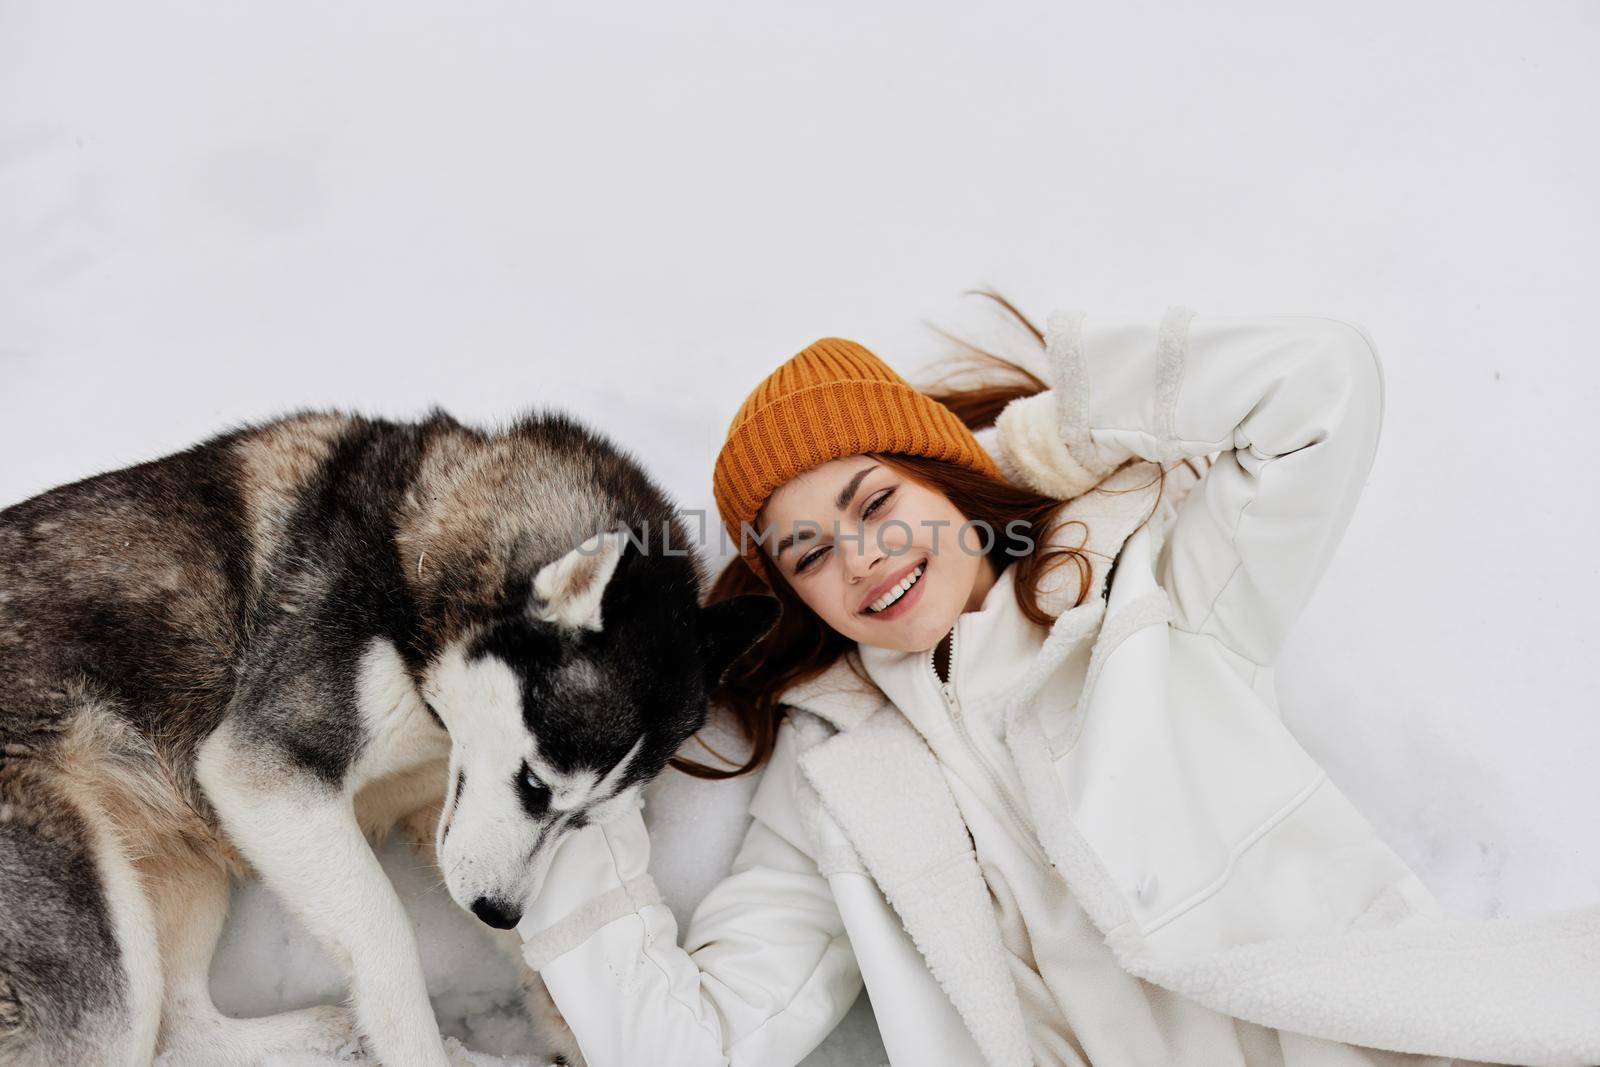 cheerful woman in the snow playing with a dog fun friendship Lifestyle by SHOTPRIME